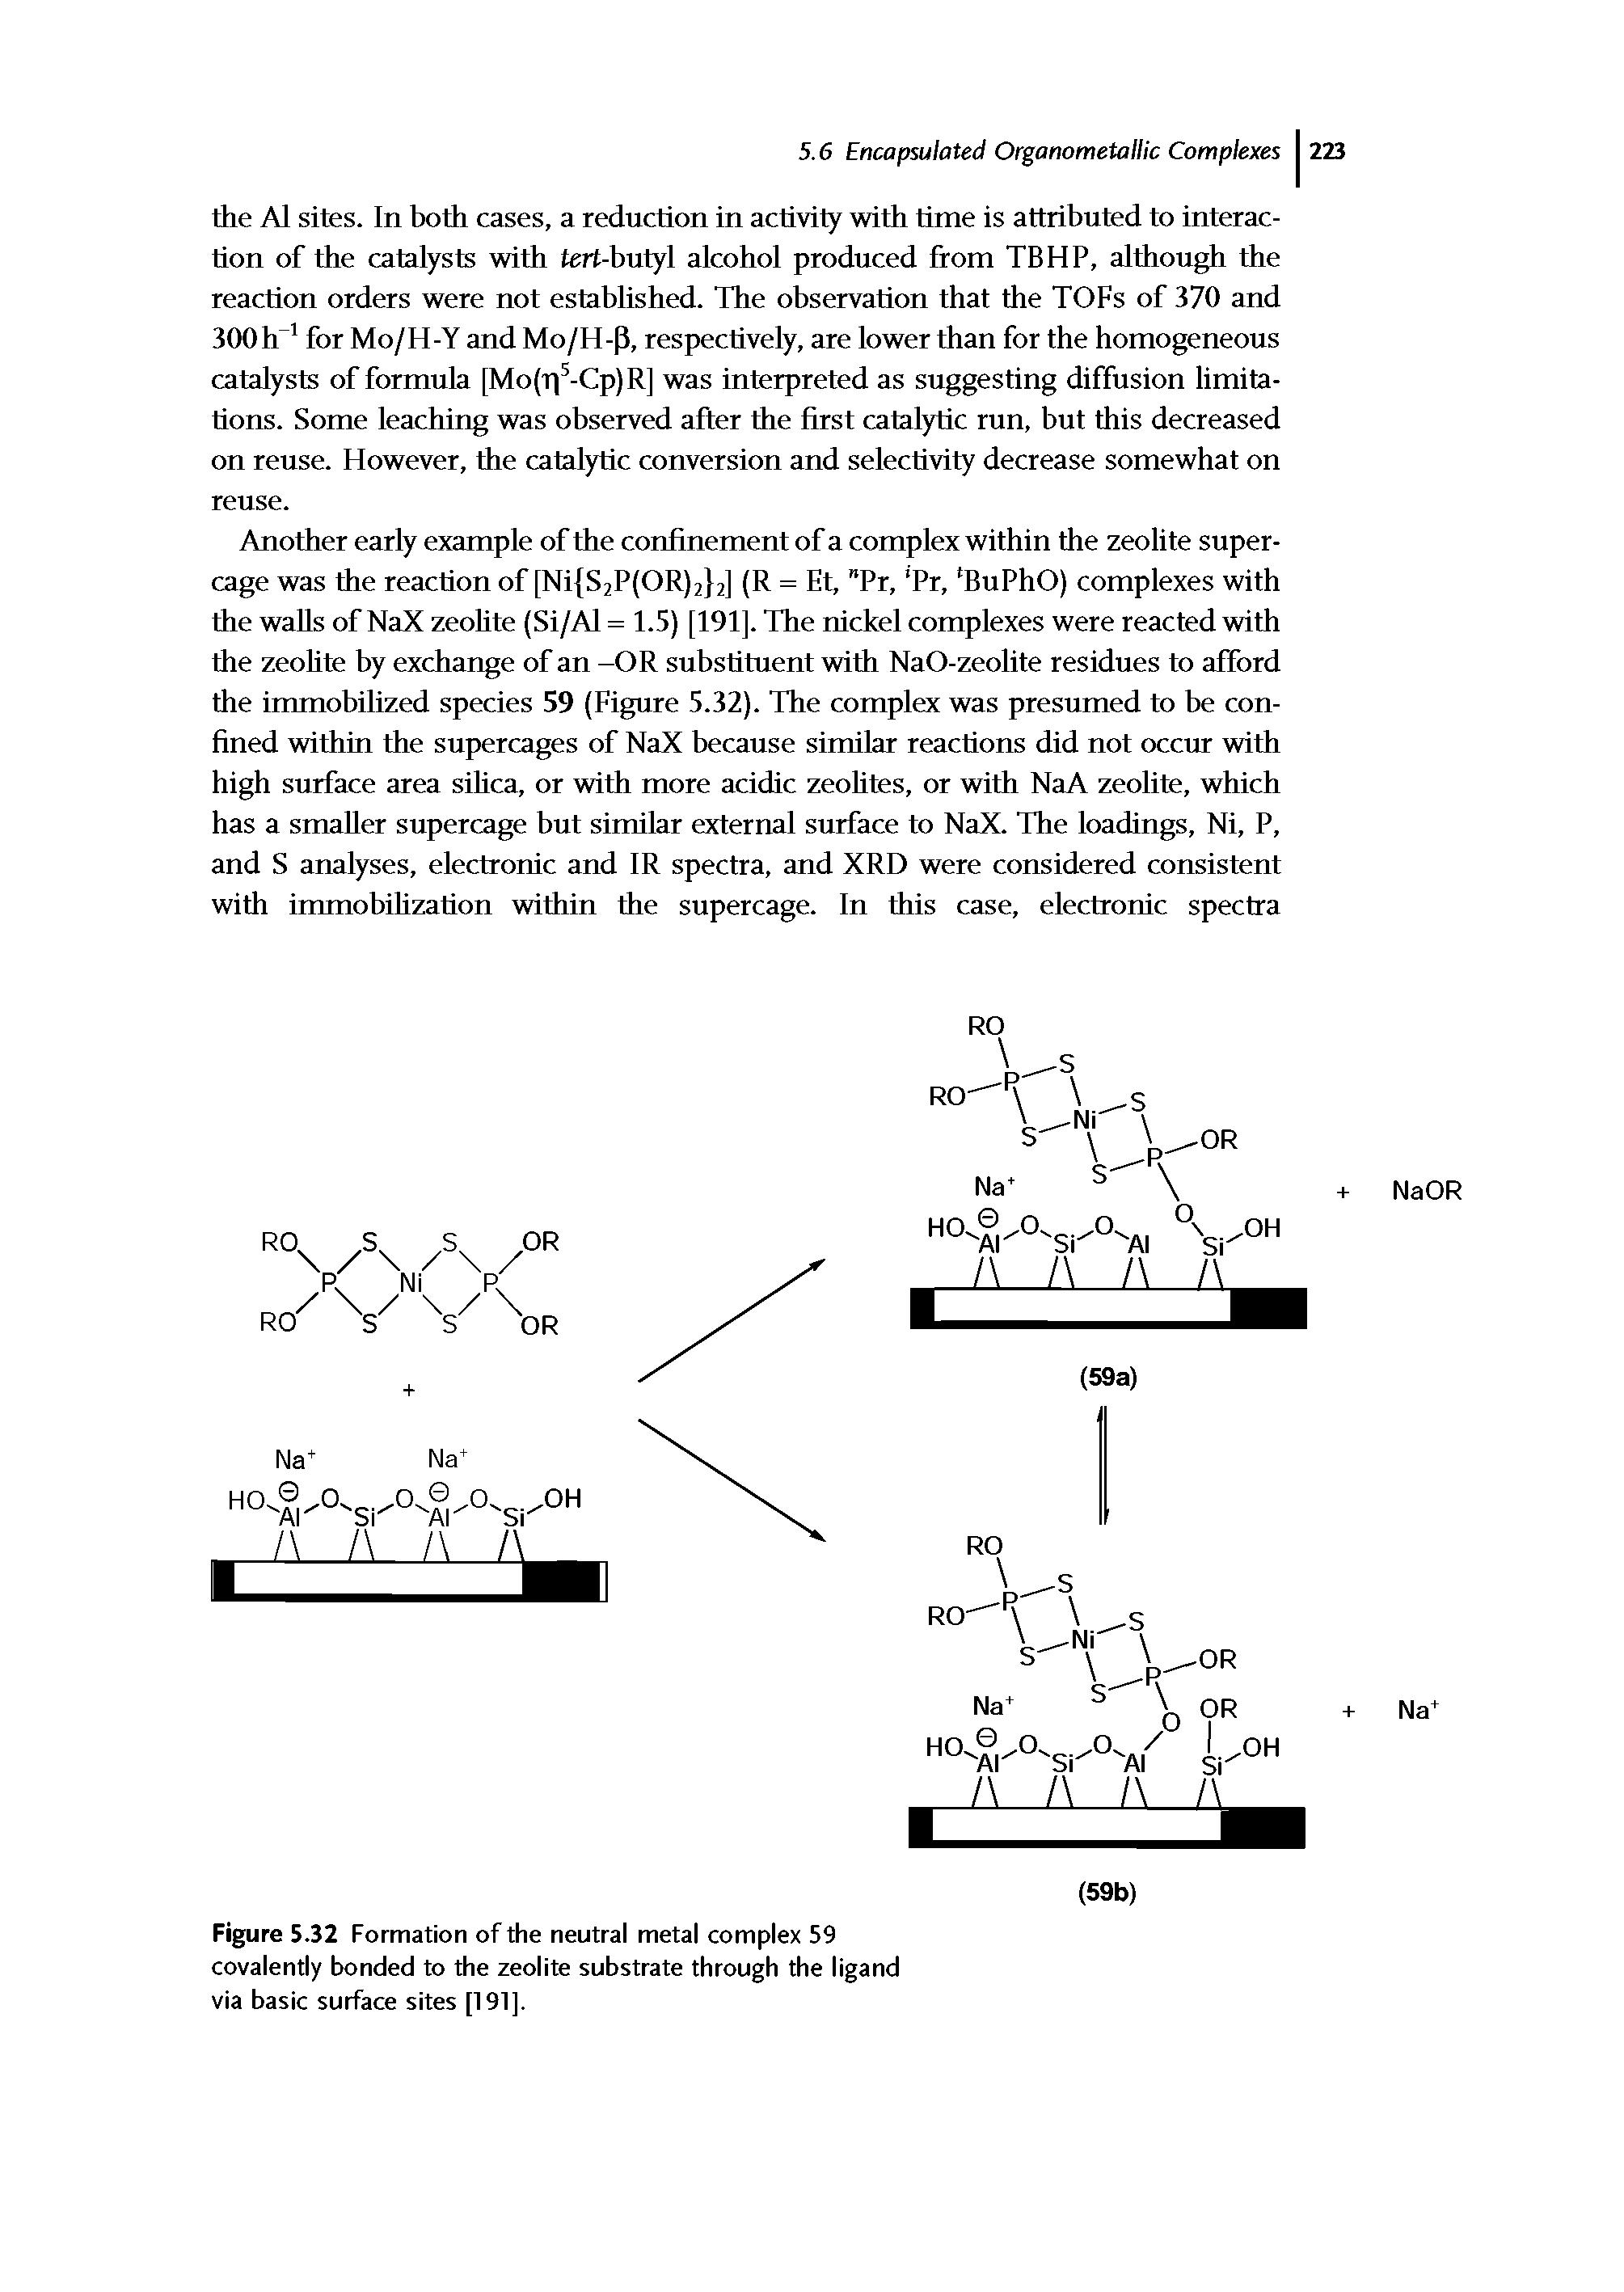 Figure 5.32 Formation of the neutral metal complex 59 covalently bonded to the zeolite substrate through the ligand via basic surface sites [191].